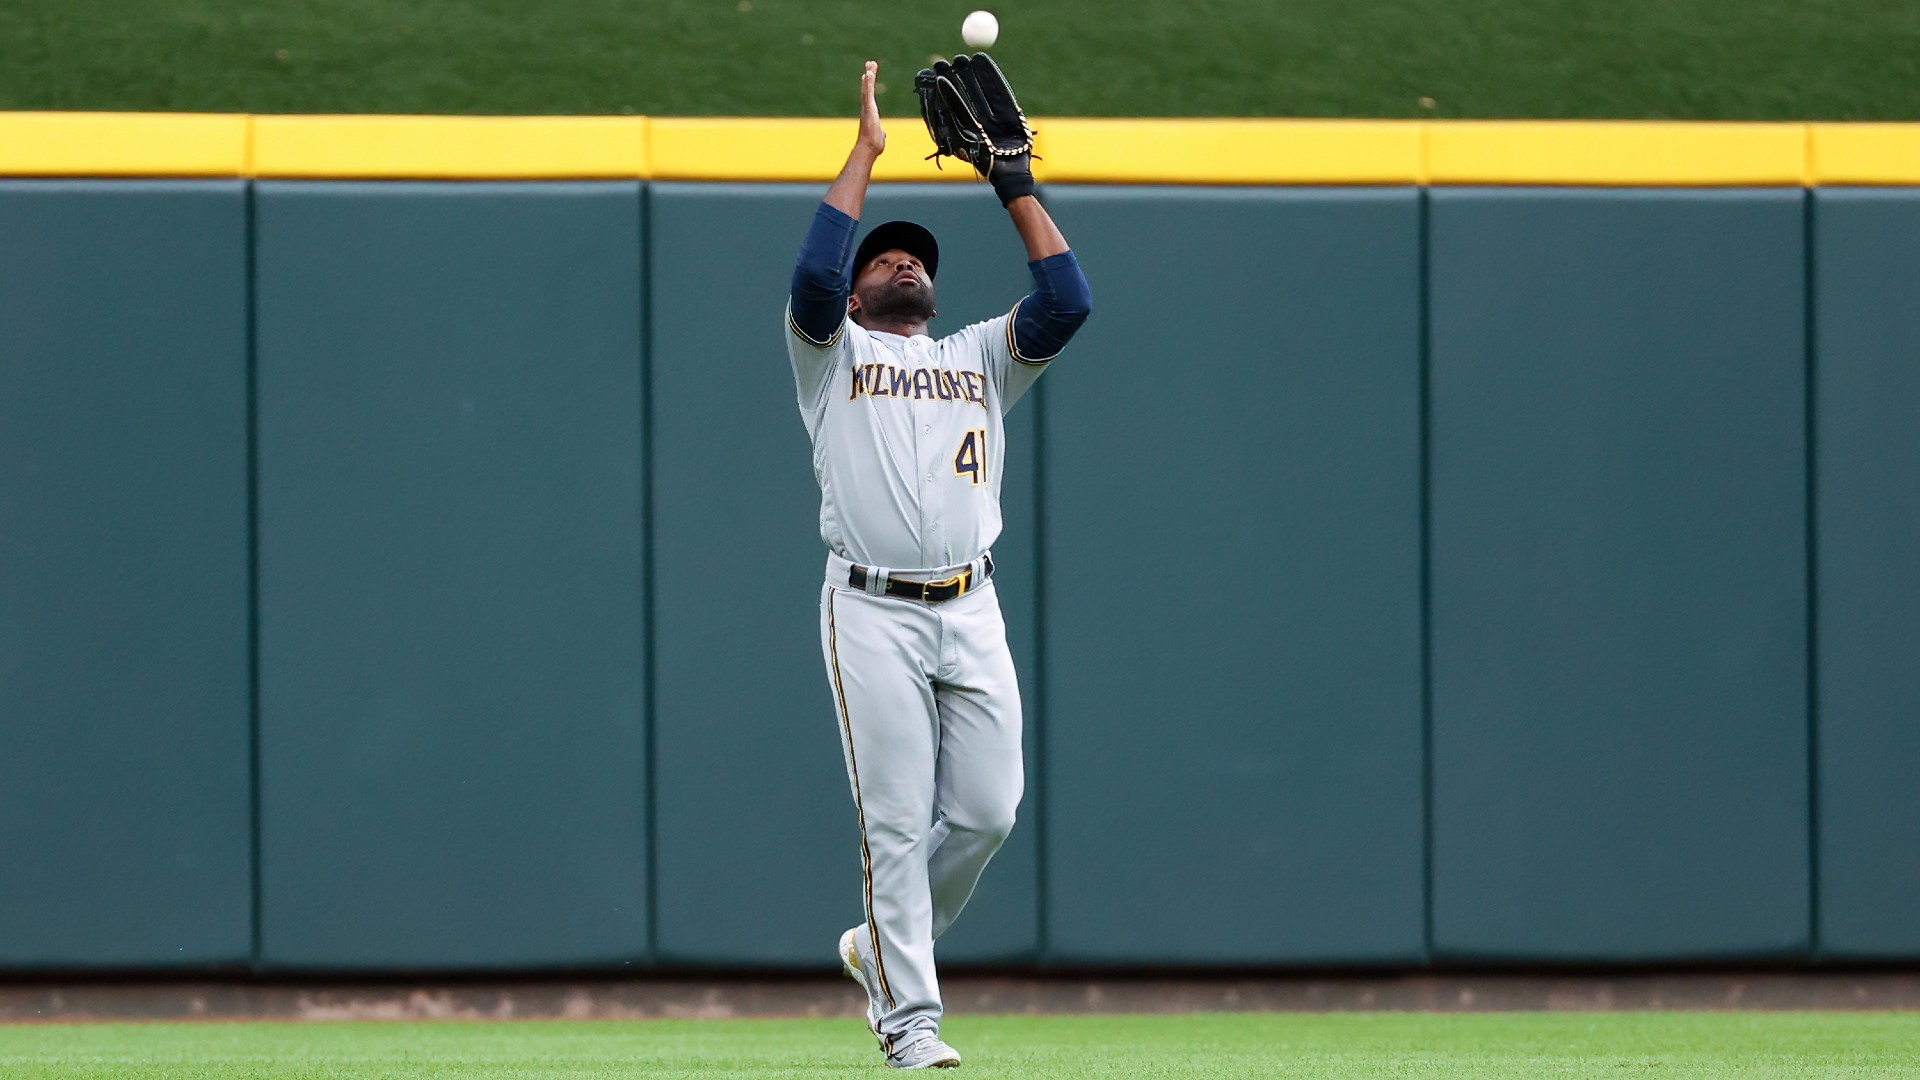 Photo of Jackie Bradley of the Brewers is proud of the fake double play: “I always imagined doing Dirk drama”